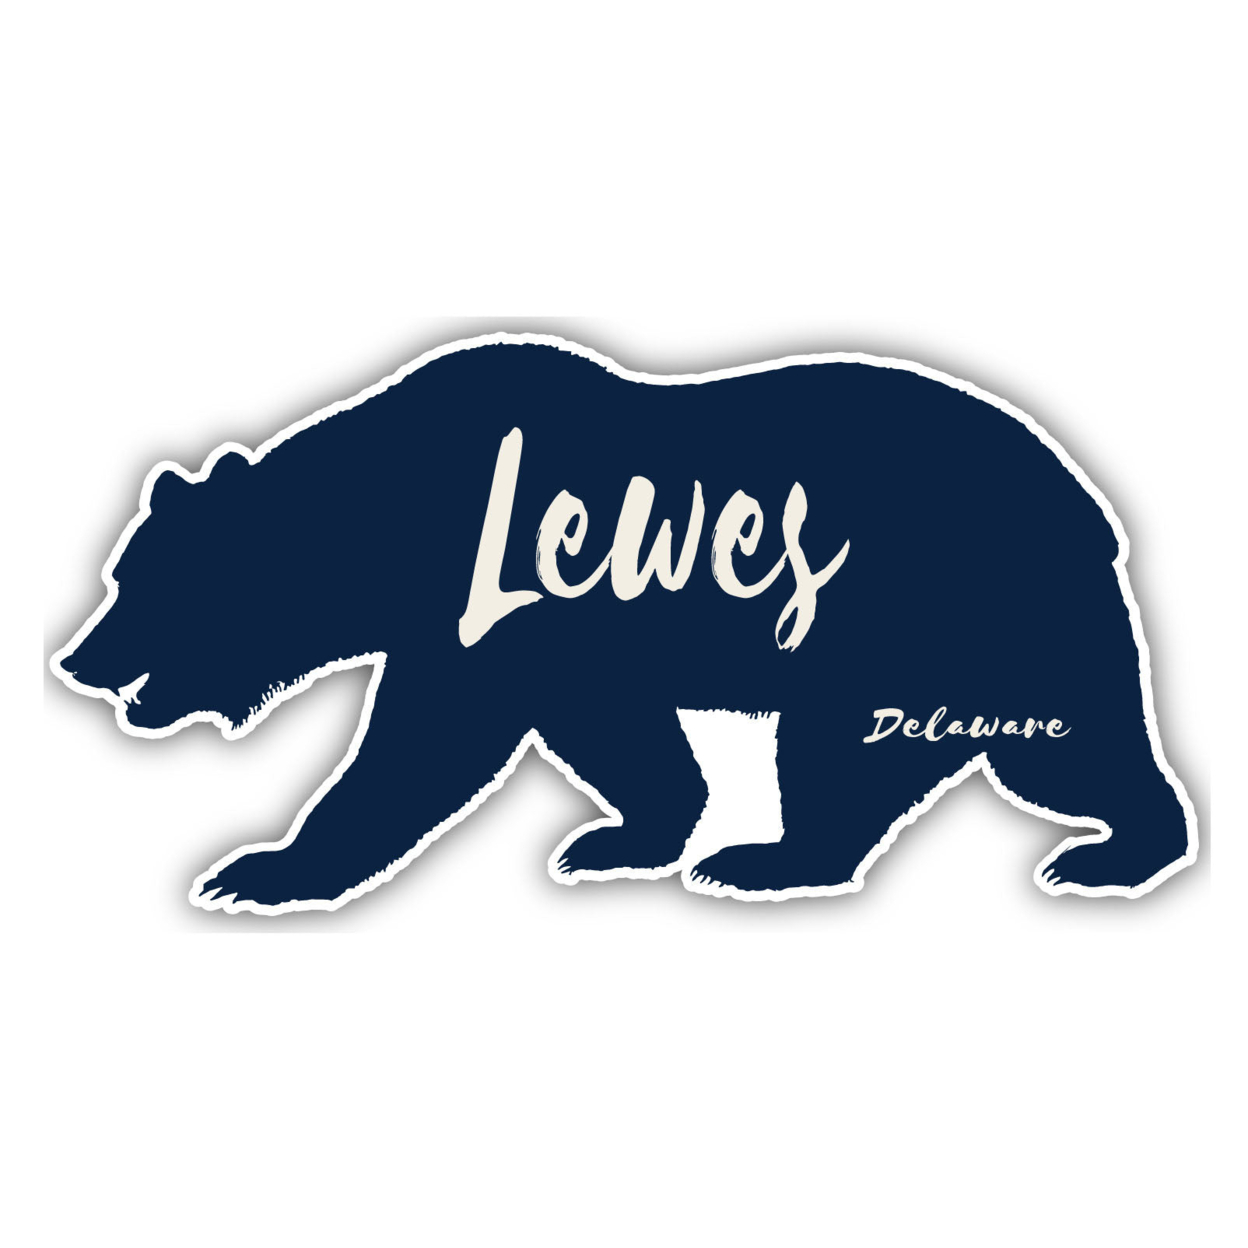 Lewes Delaware Souvenir Decorative Stickers (Choose Theme And Size) - 2-Inch, Great Outdoors